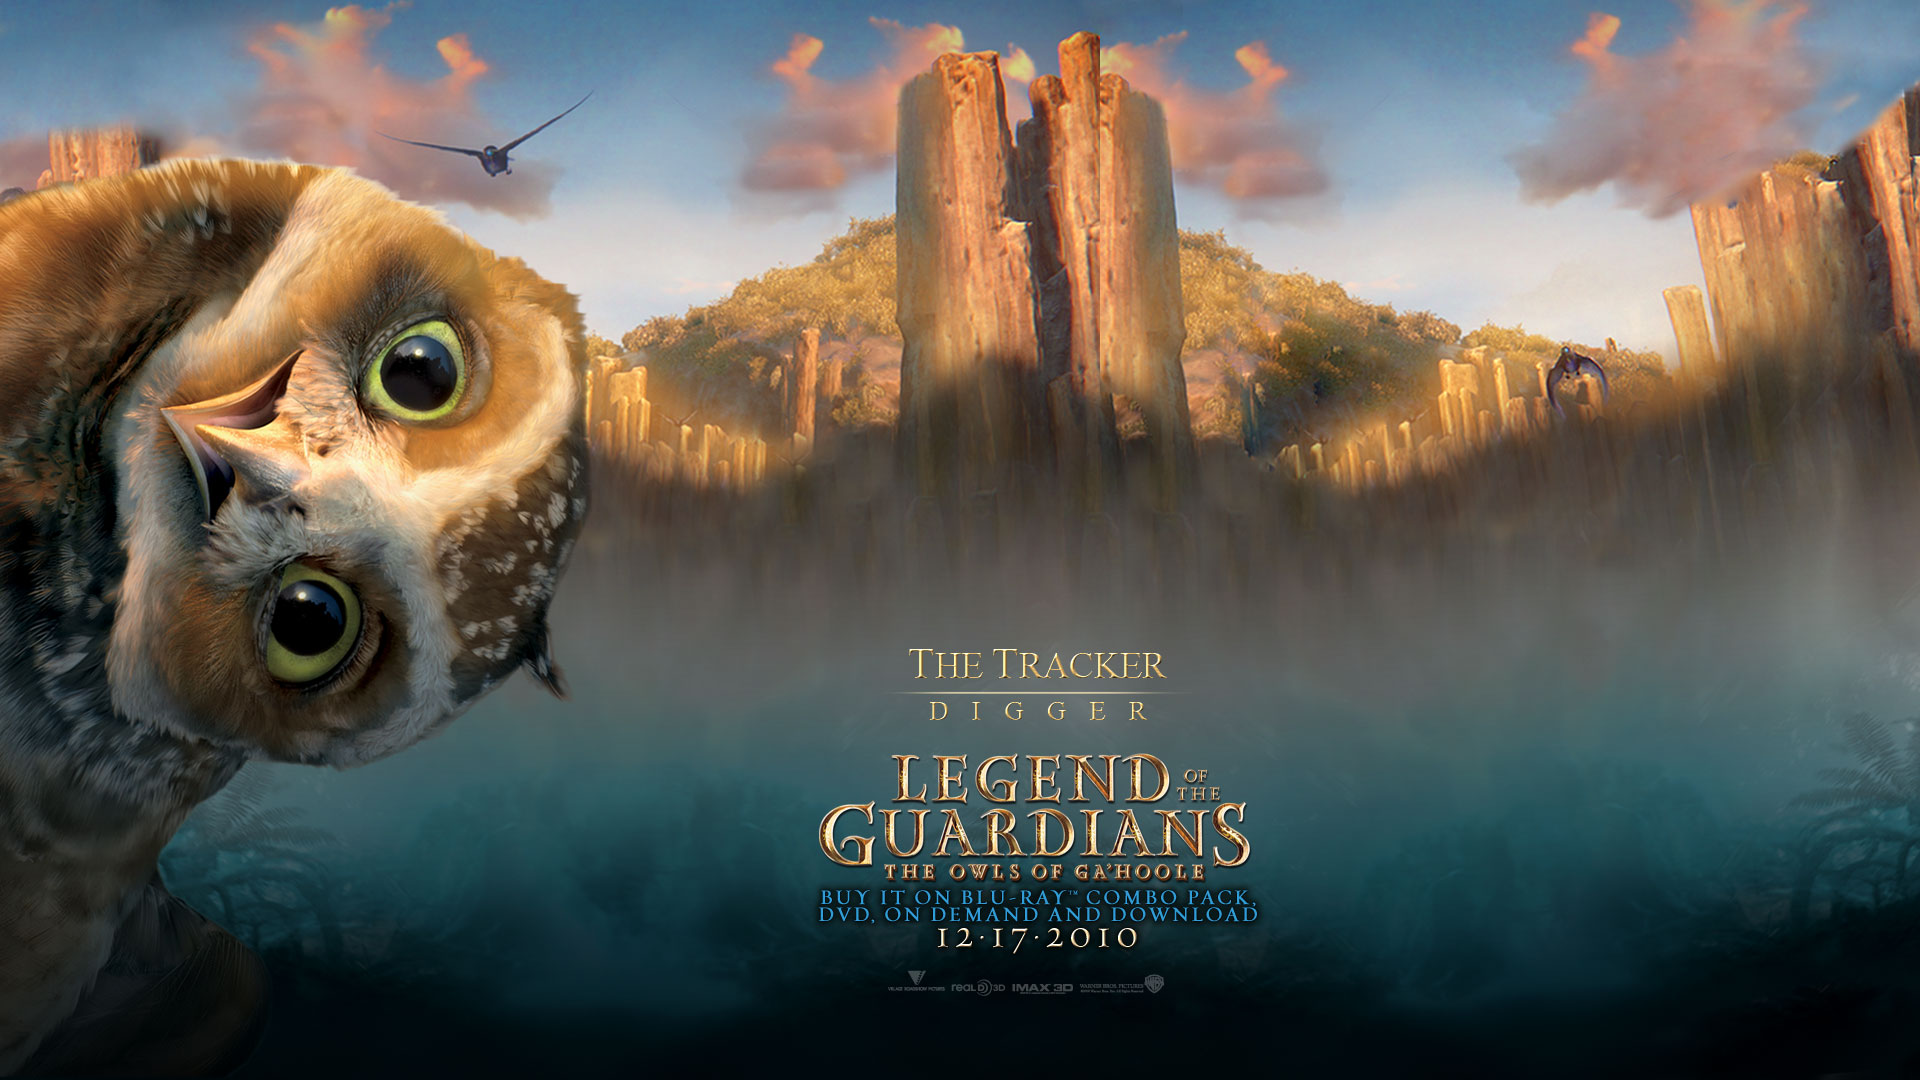 Amazing Legend Of The Guardians: The Owls Of Ga'Hoole Pictures & Backgrounds